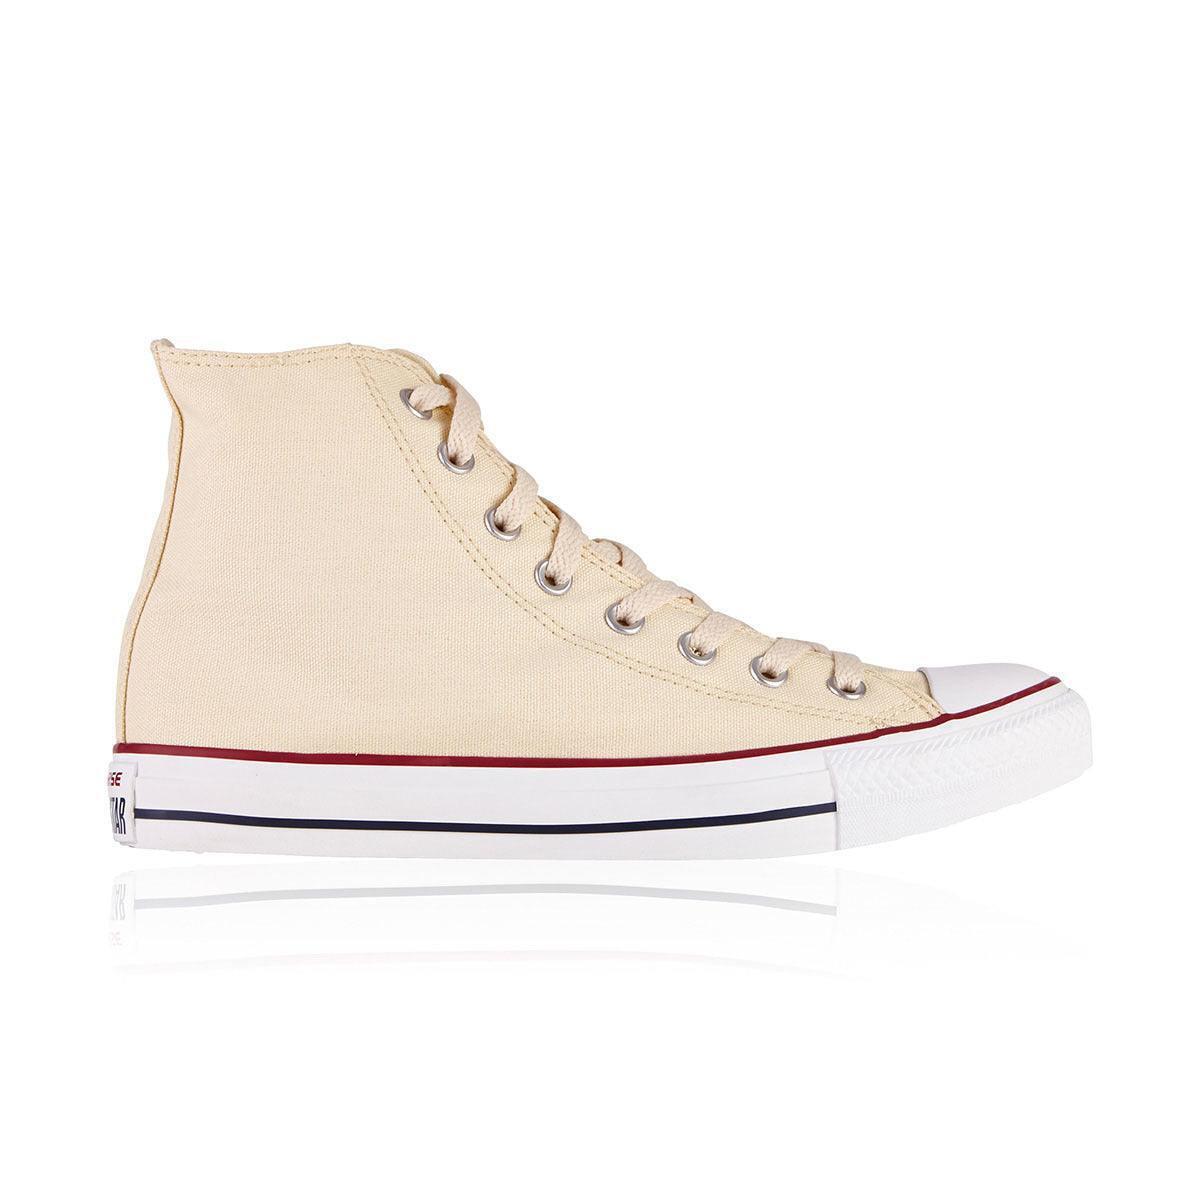 Converse - Chuck Taylor All Star Hi Top Unisex Shoes - Mens US 3.5/Womens US 5.5 - Unbleached White